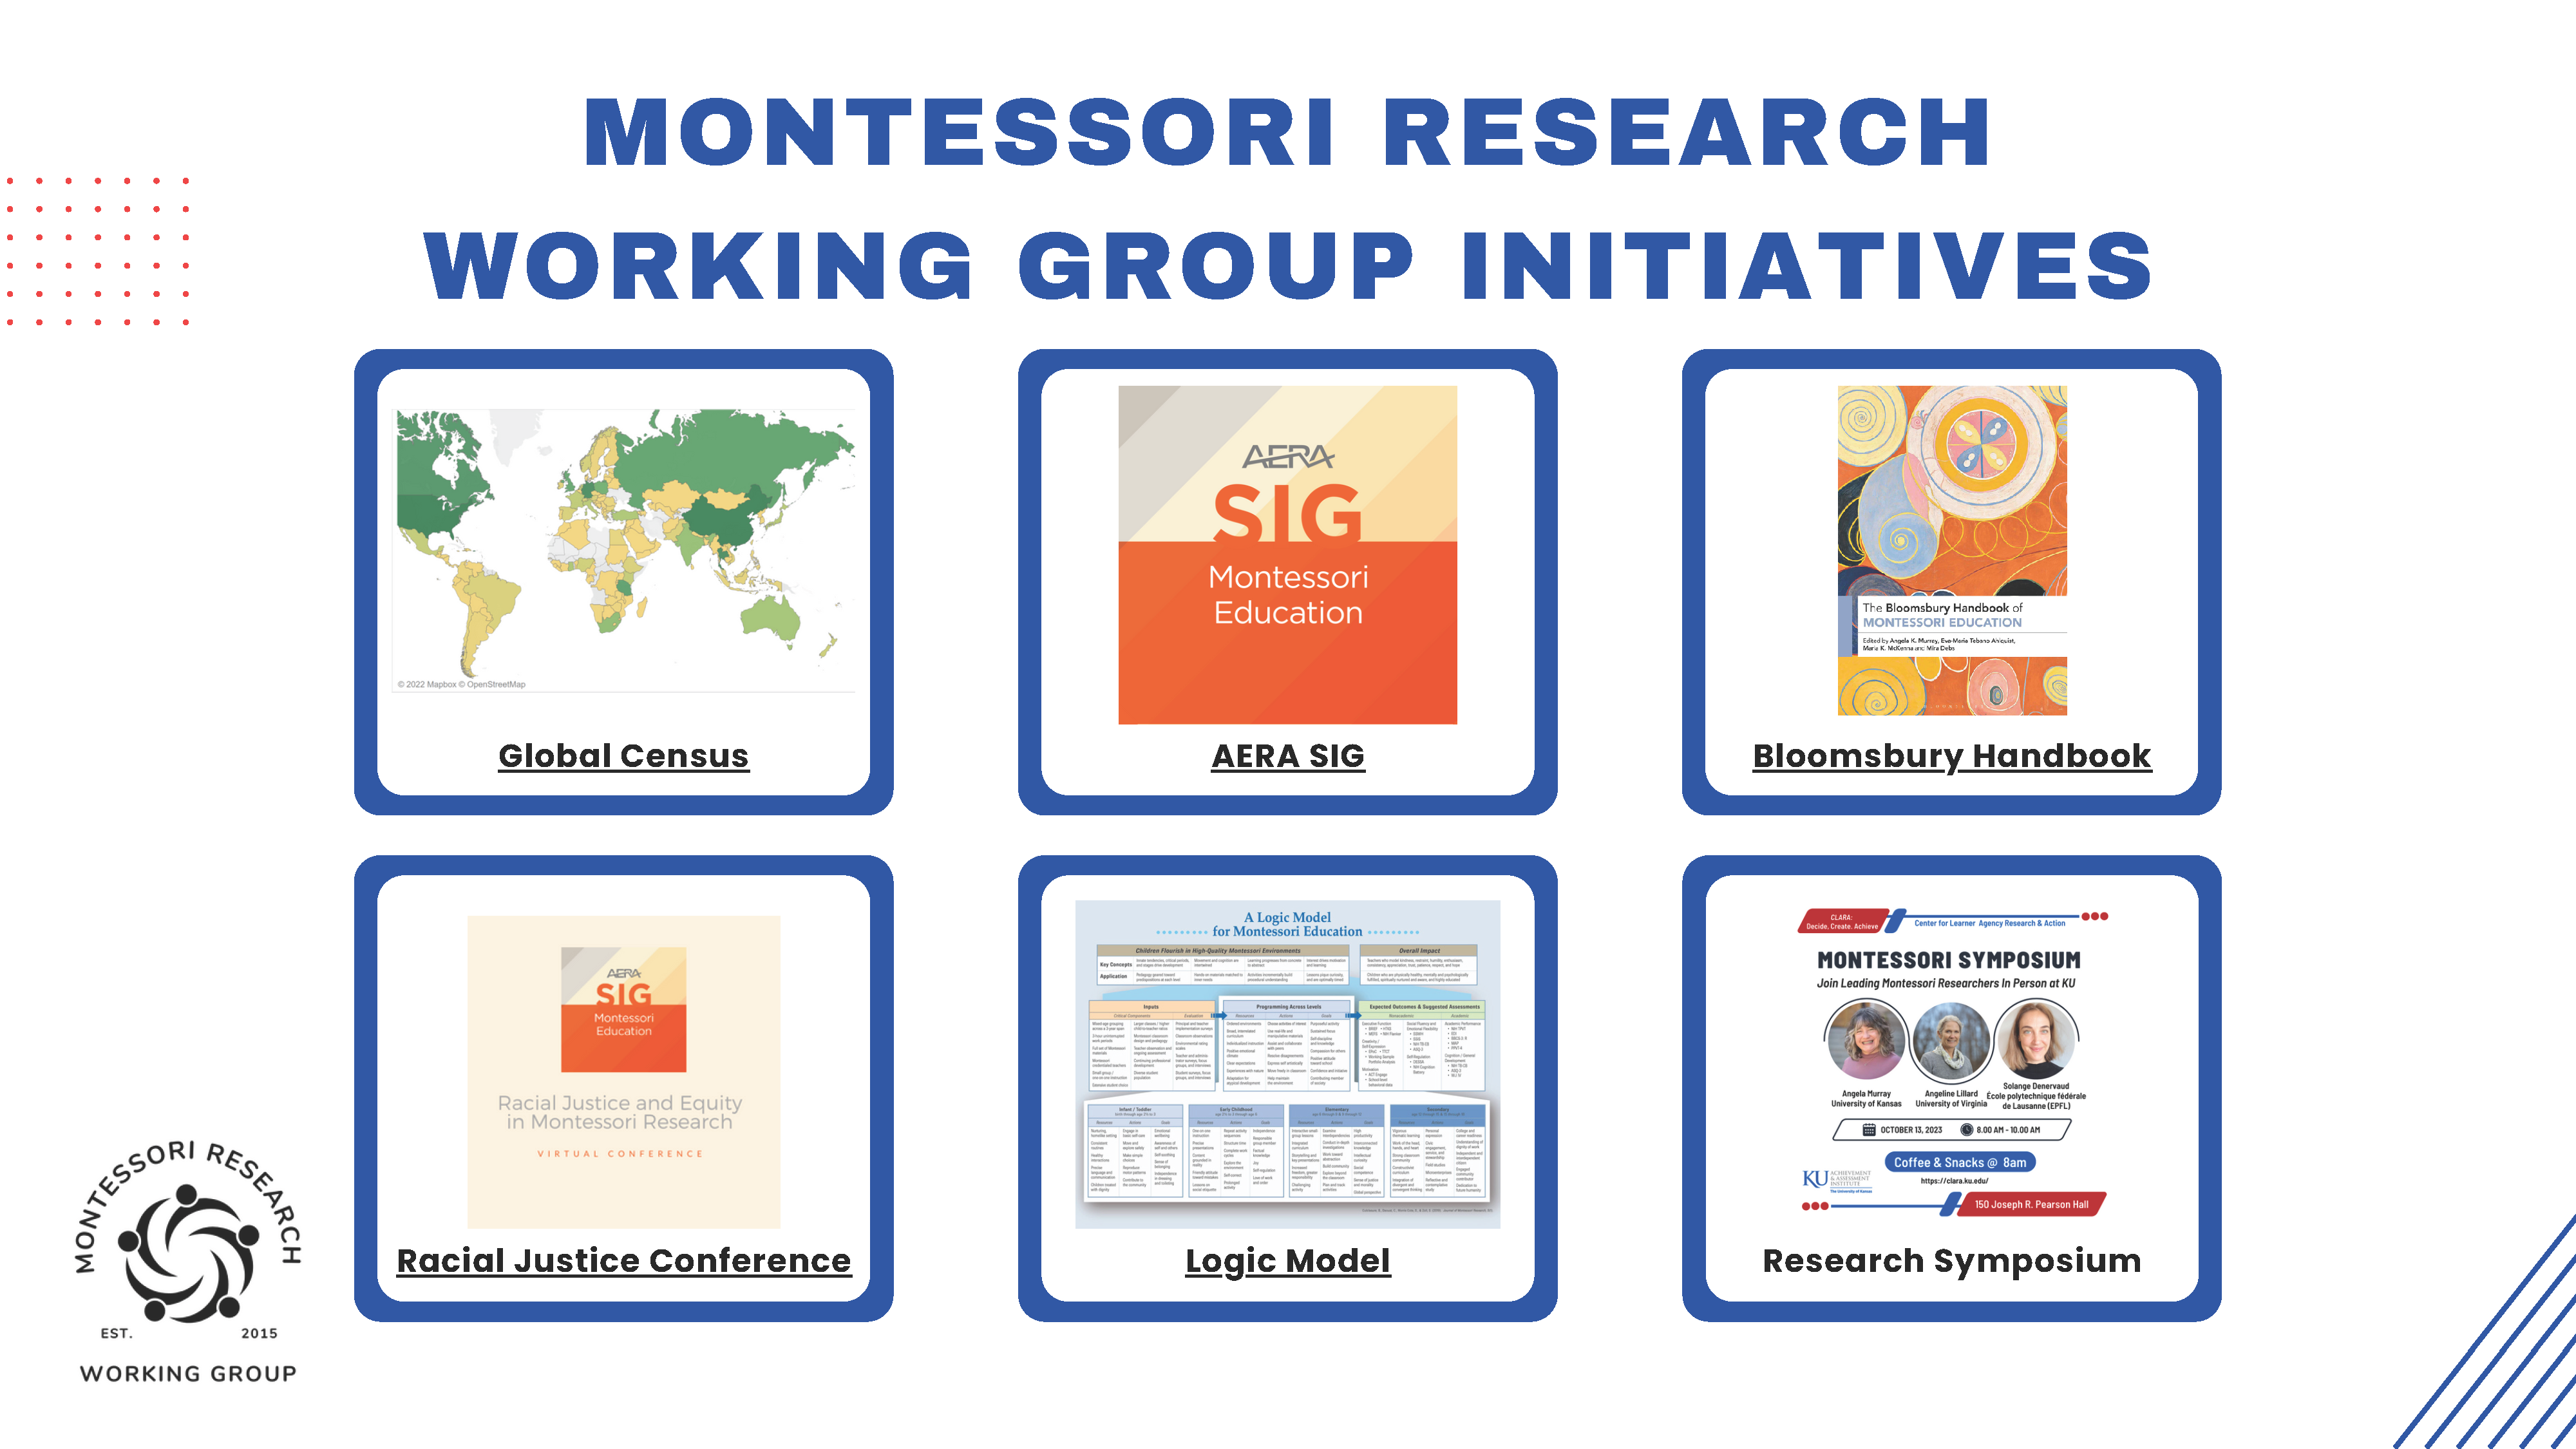 A graphic presenting several accomplishments and initiatives of the Montessori Research Working Group, featuring images for "Global Consensus," "AREA SIG," "Bloomsbury Handbook," "Racial Justice Conference," "Logic Model," "Research Symposium"